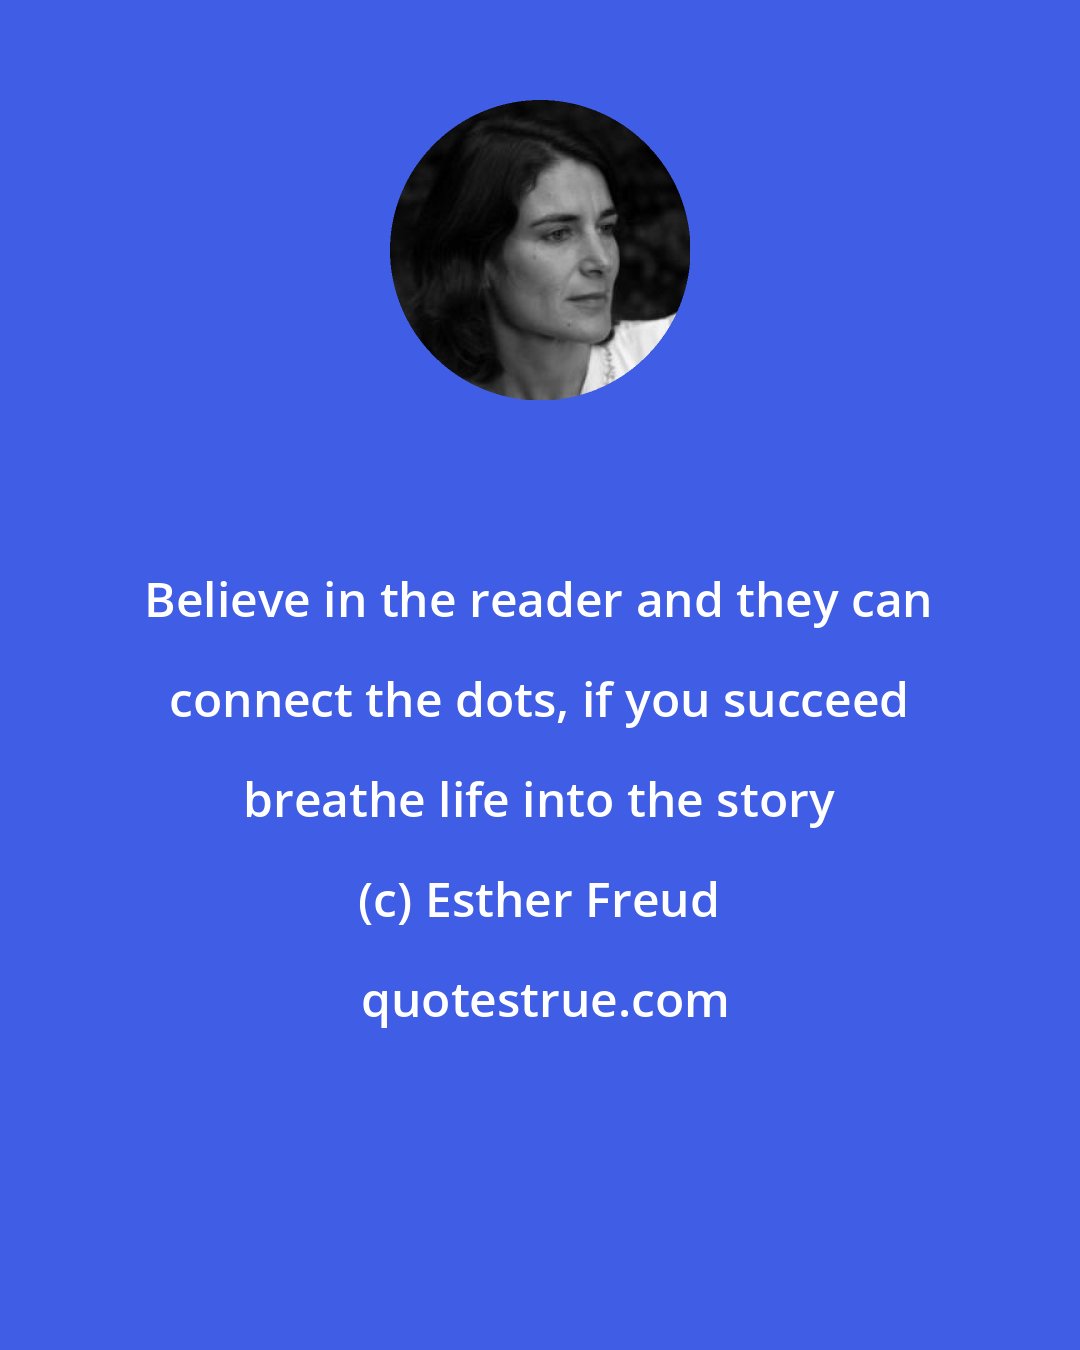 Esther Freud: Believe in the reader and they can connect the dots, if you succeed breathe life into the story